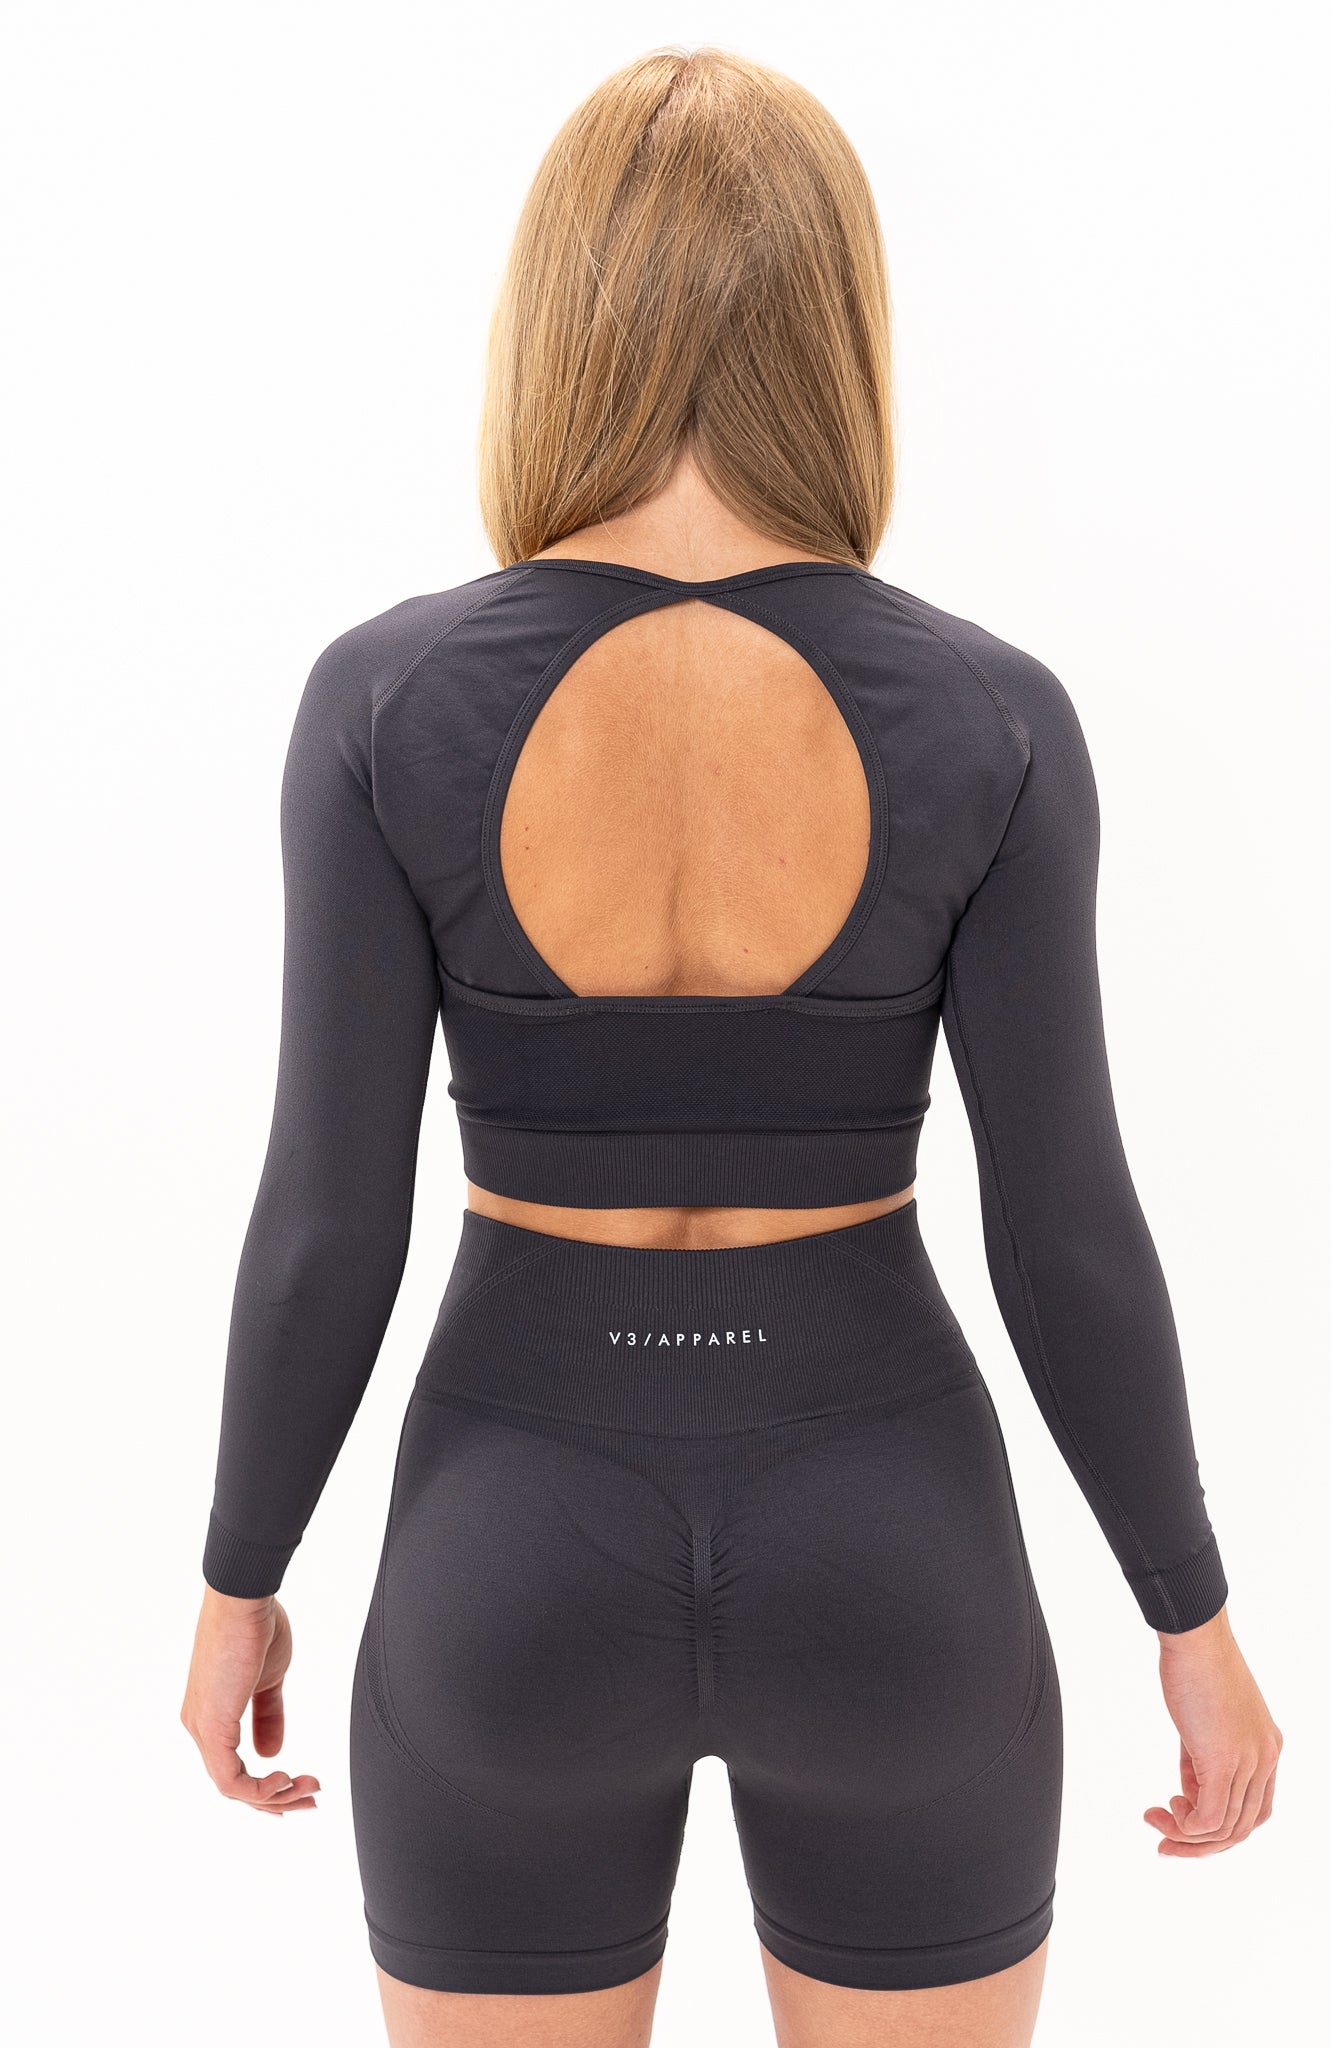 redbaysand Women's Tempo seamless long sleeve cropped training top in charcoal grey with thumb hole long sleeves and crop fit for gym workouts training, Running, yoga, bodybuilding and bikini fitness.